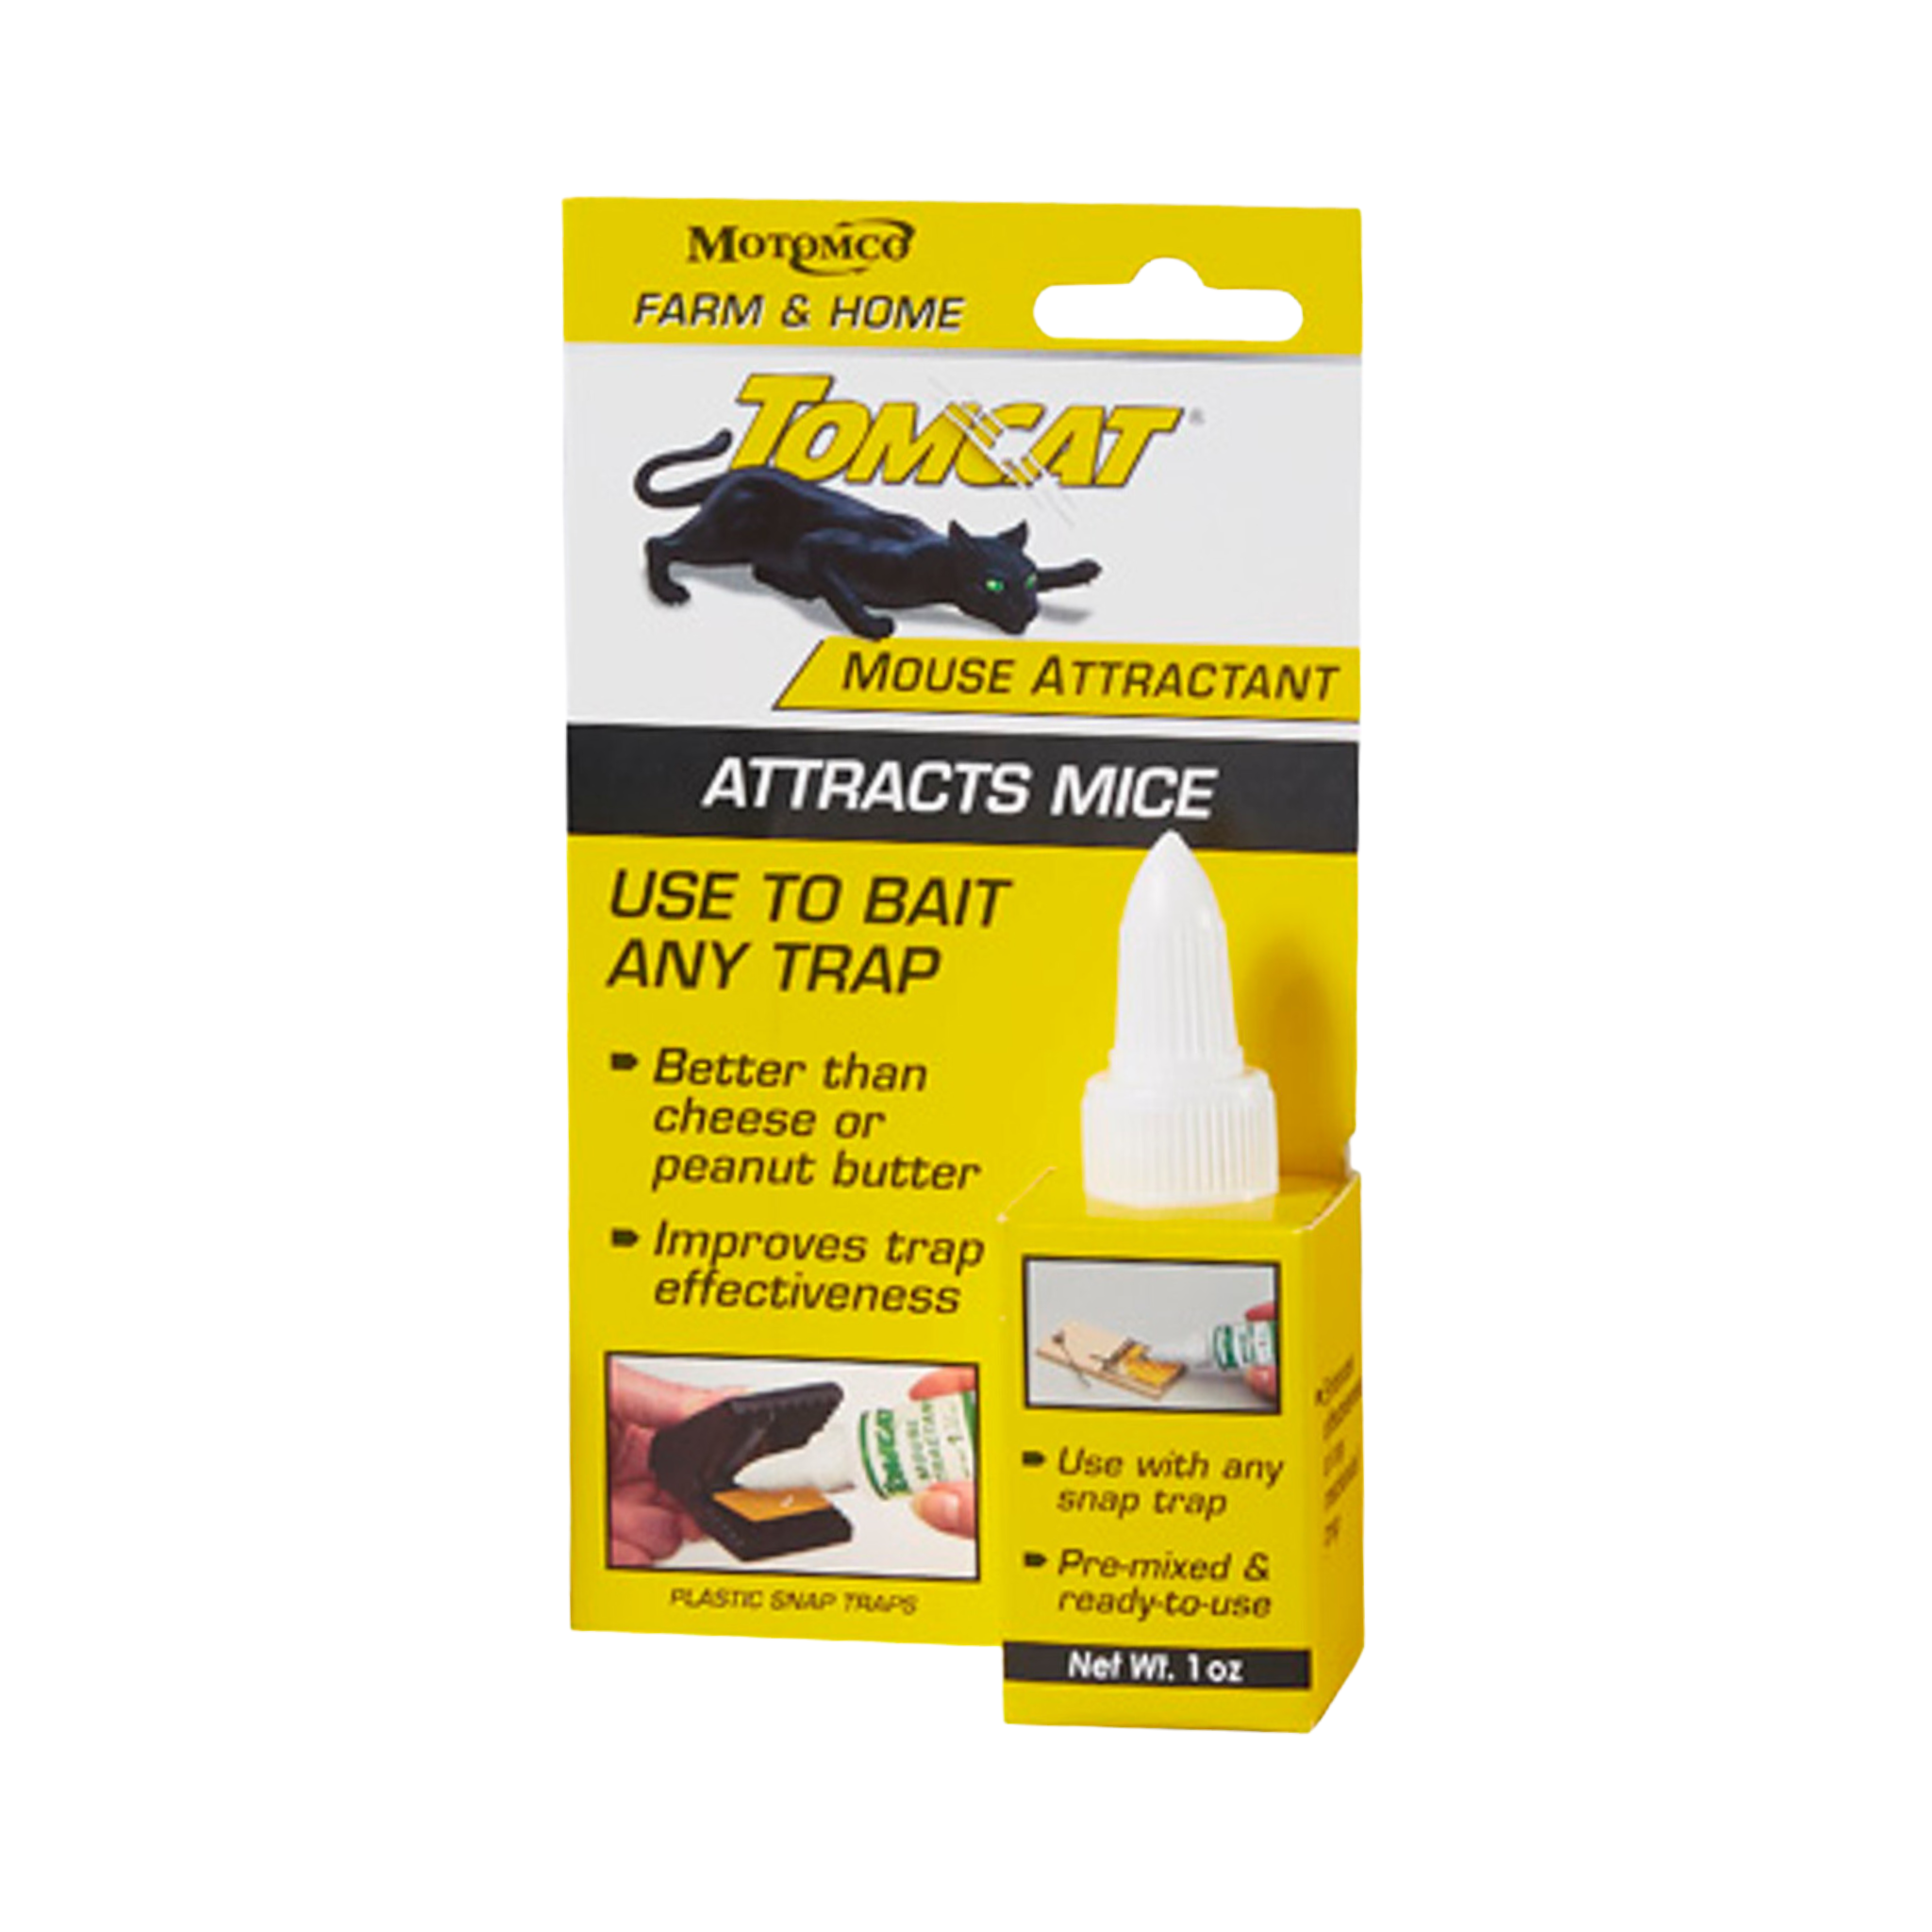 Tomcat Mouse Attractant